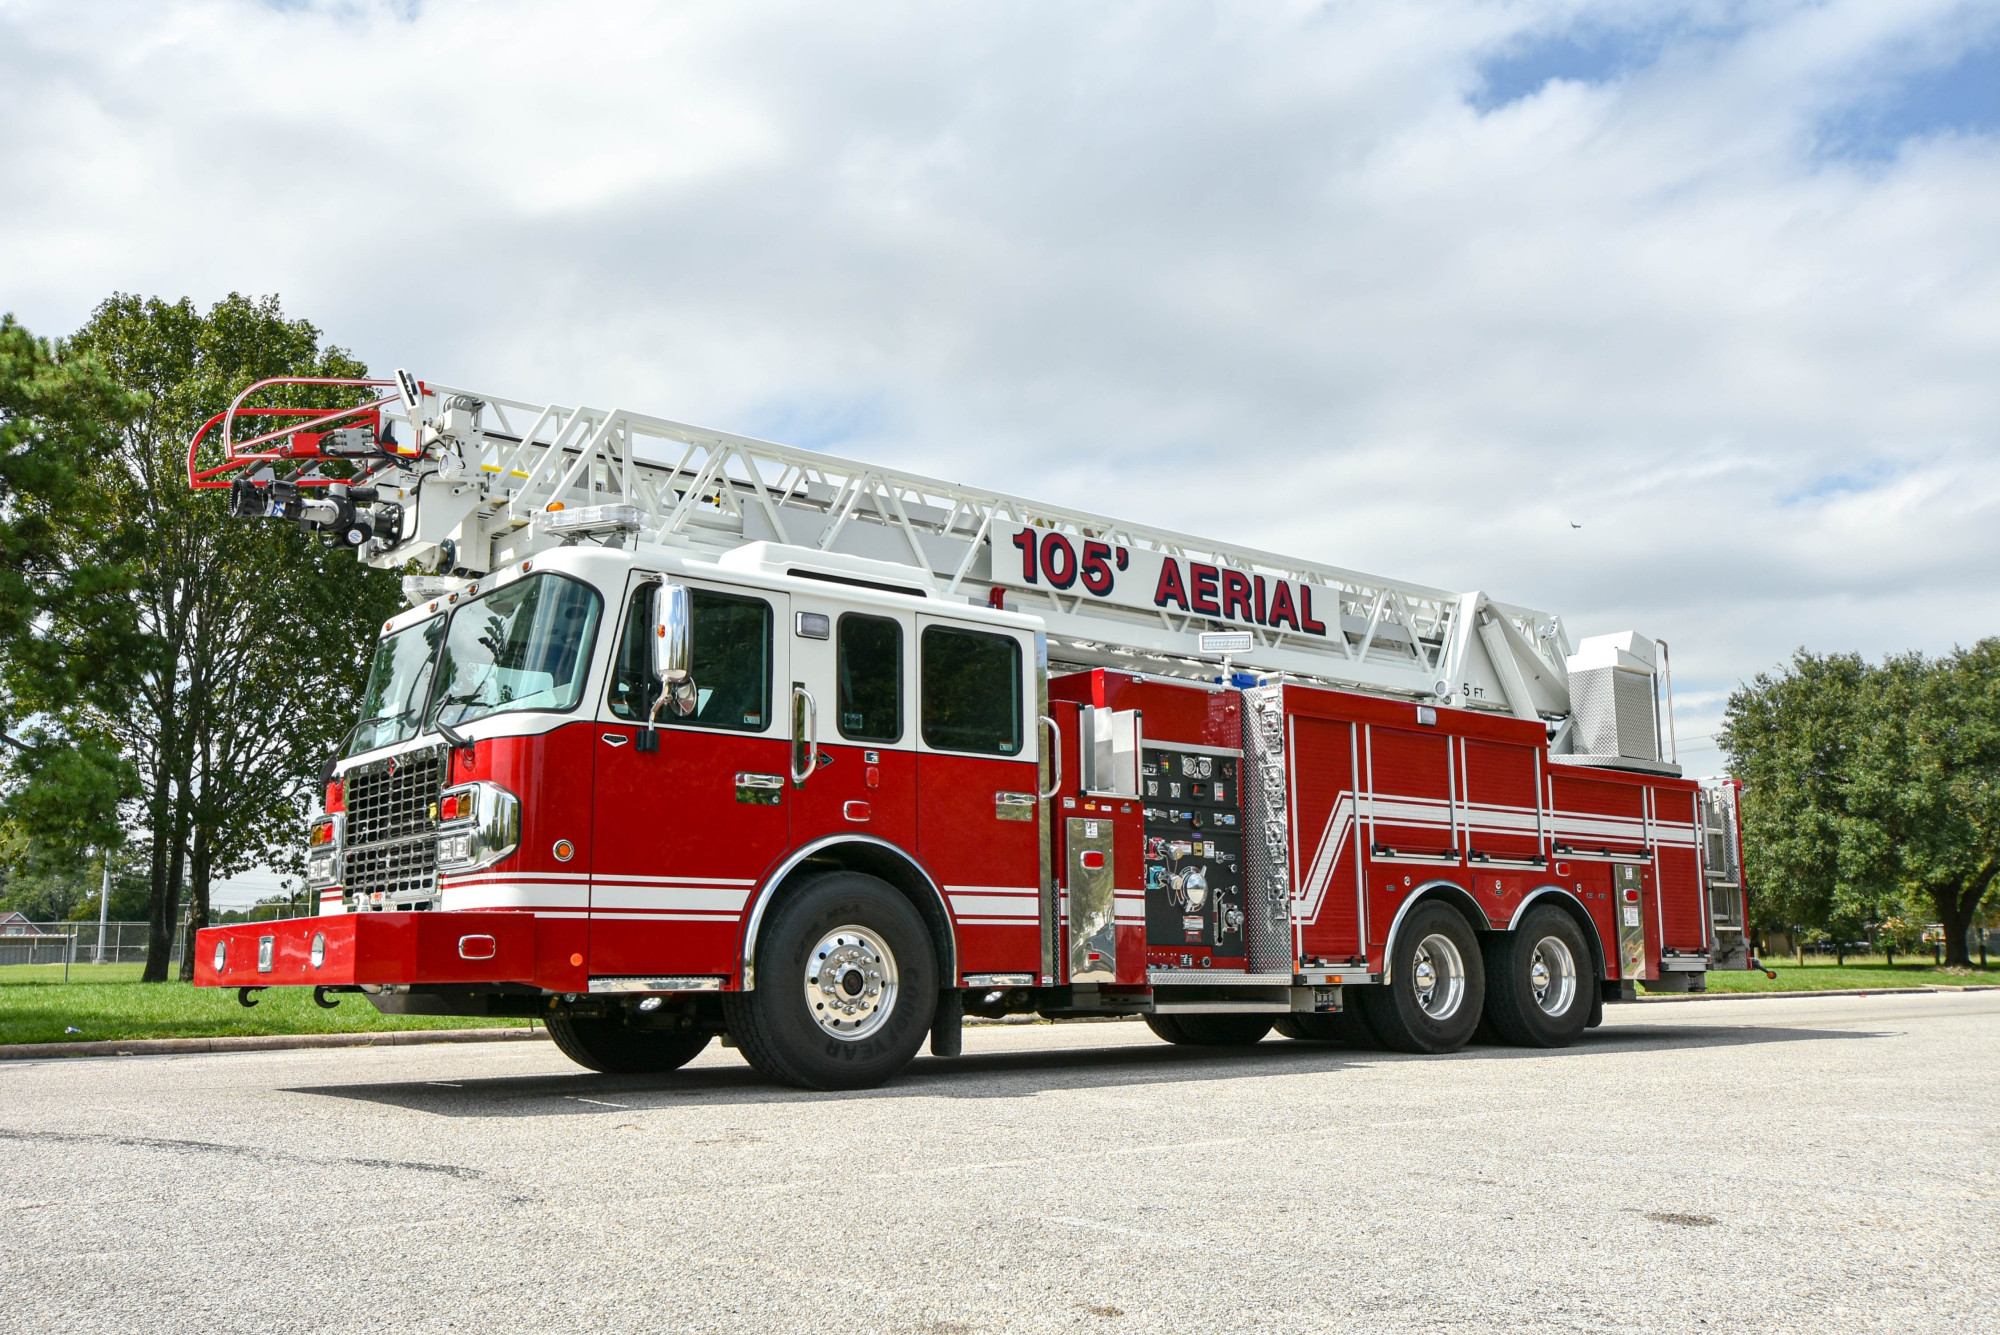 Metro Fire Apparatus Specialists, Inc. - When you purchase a 3M